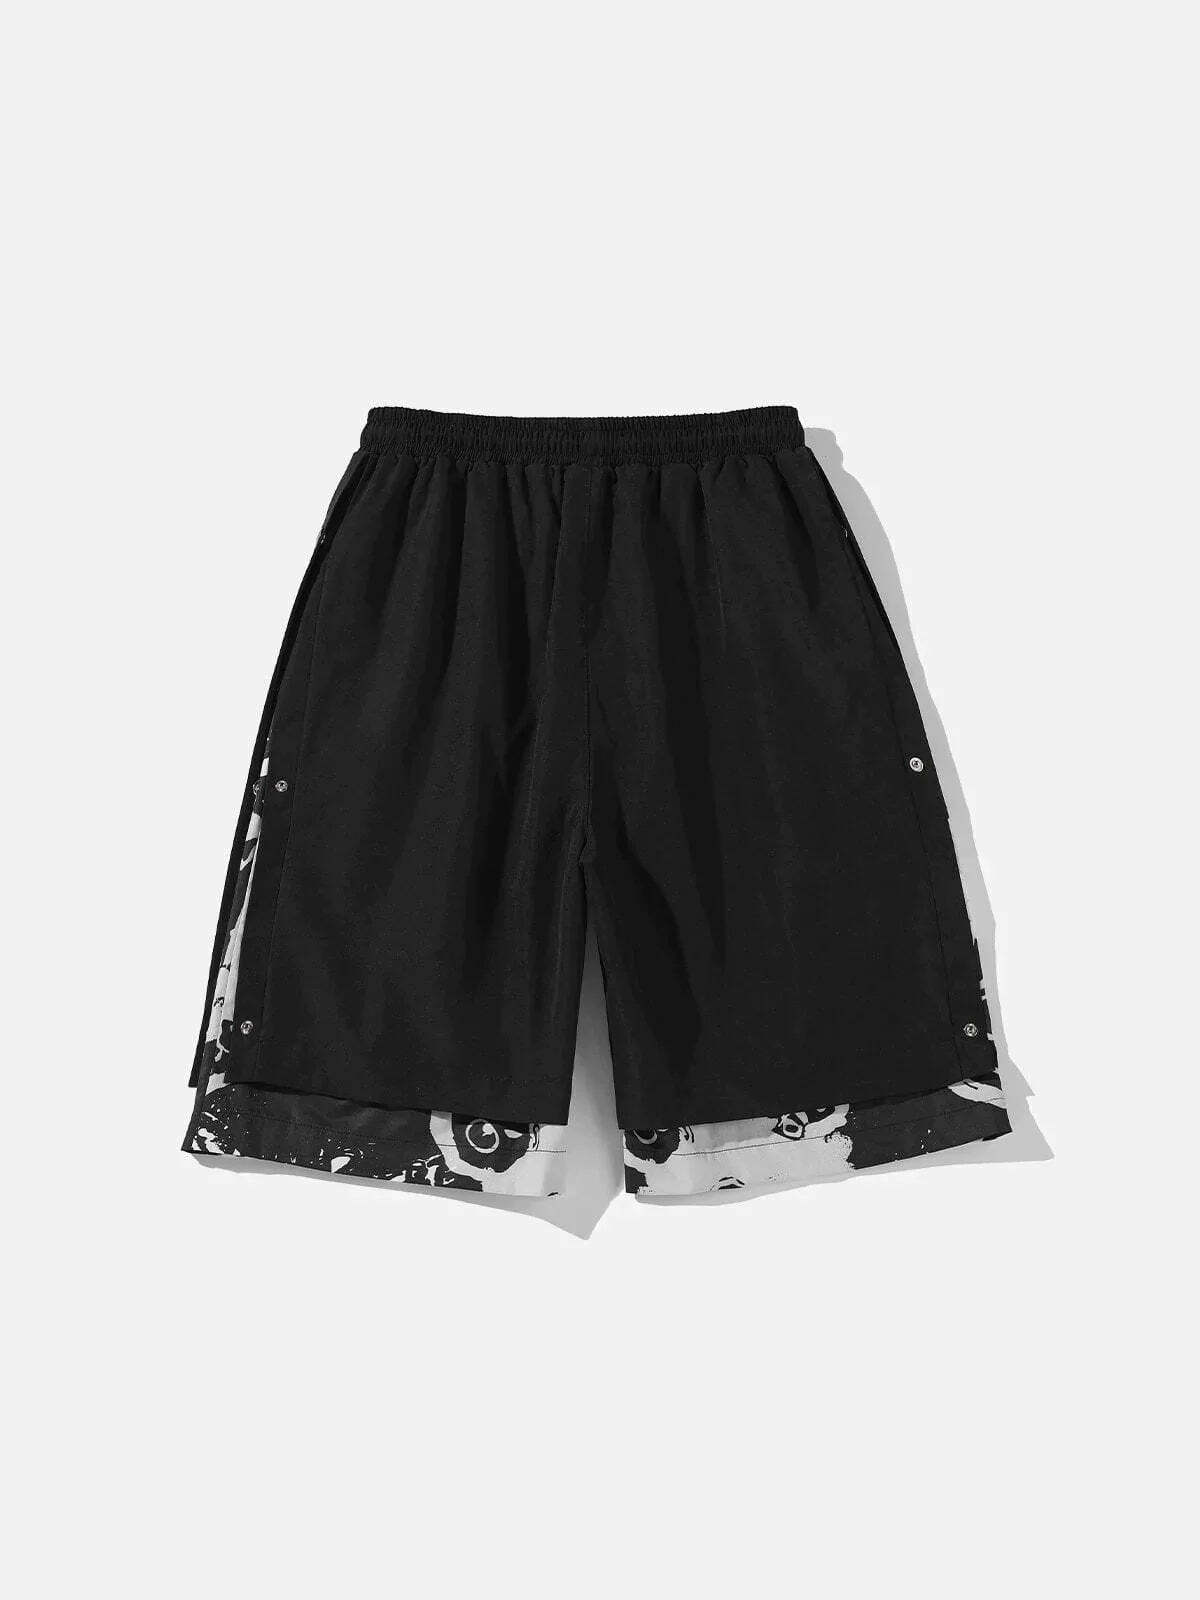 vintage hip hop fake two piece shorts edgy stitching & urban style 8351